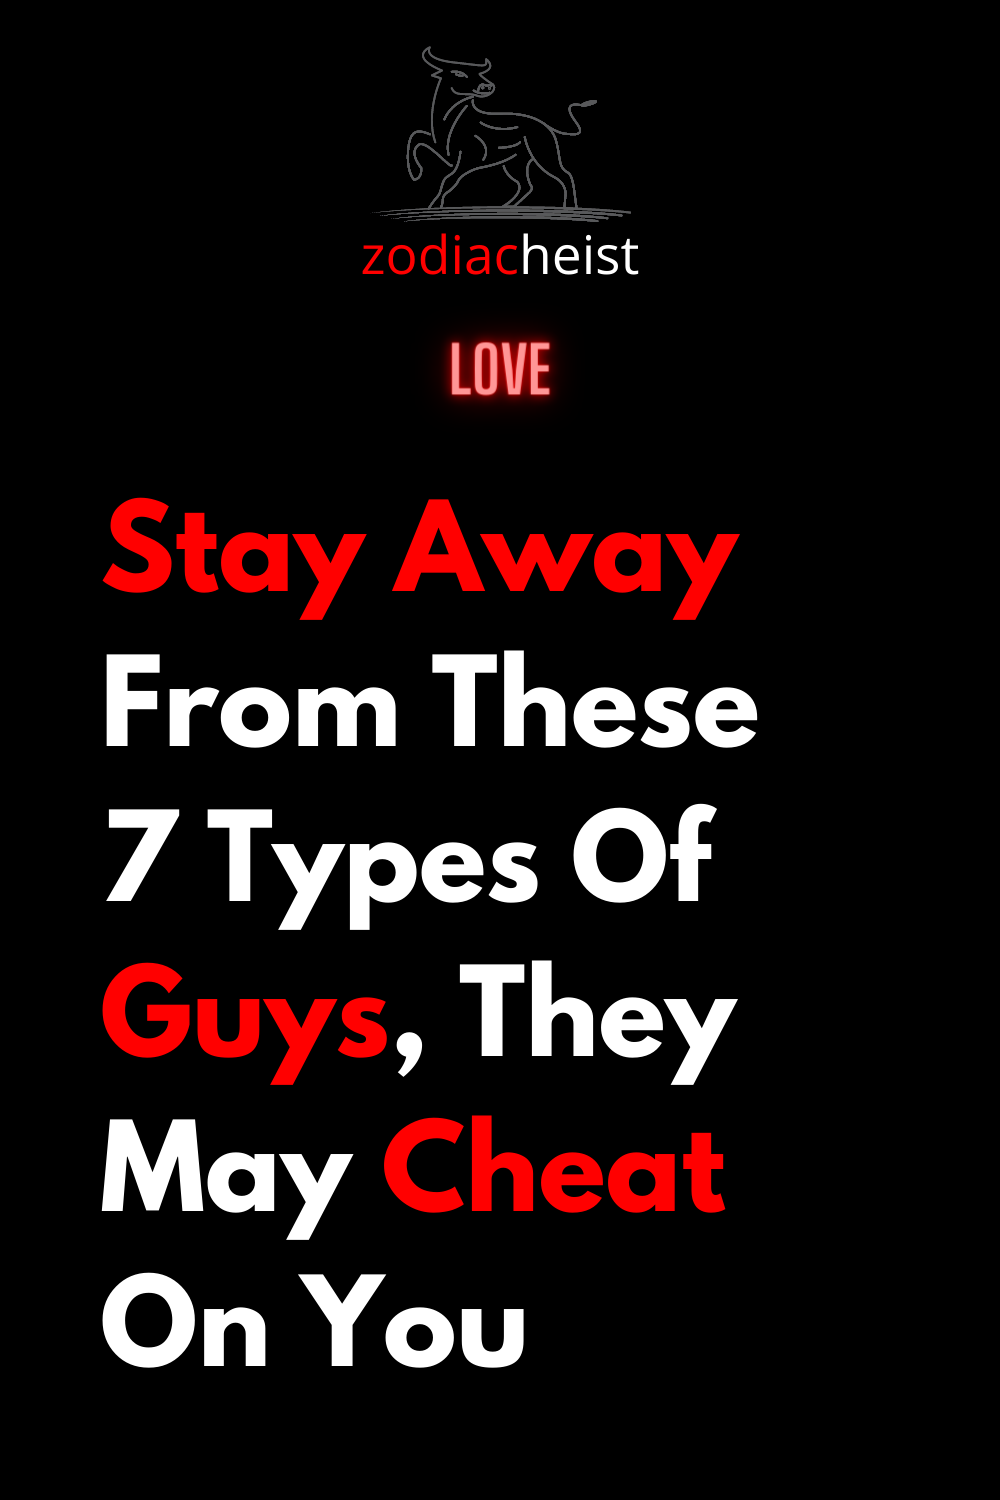 Stay Away From These 7 Types Of Guys, They May Cheat On You